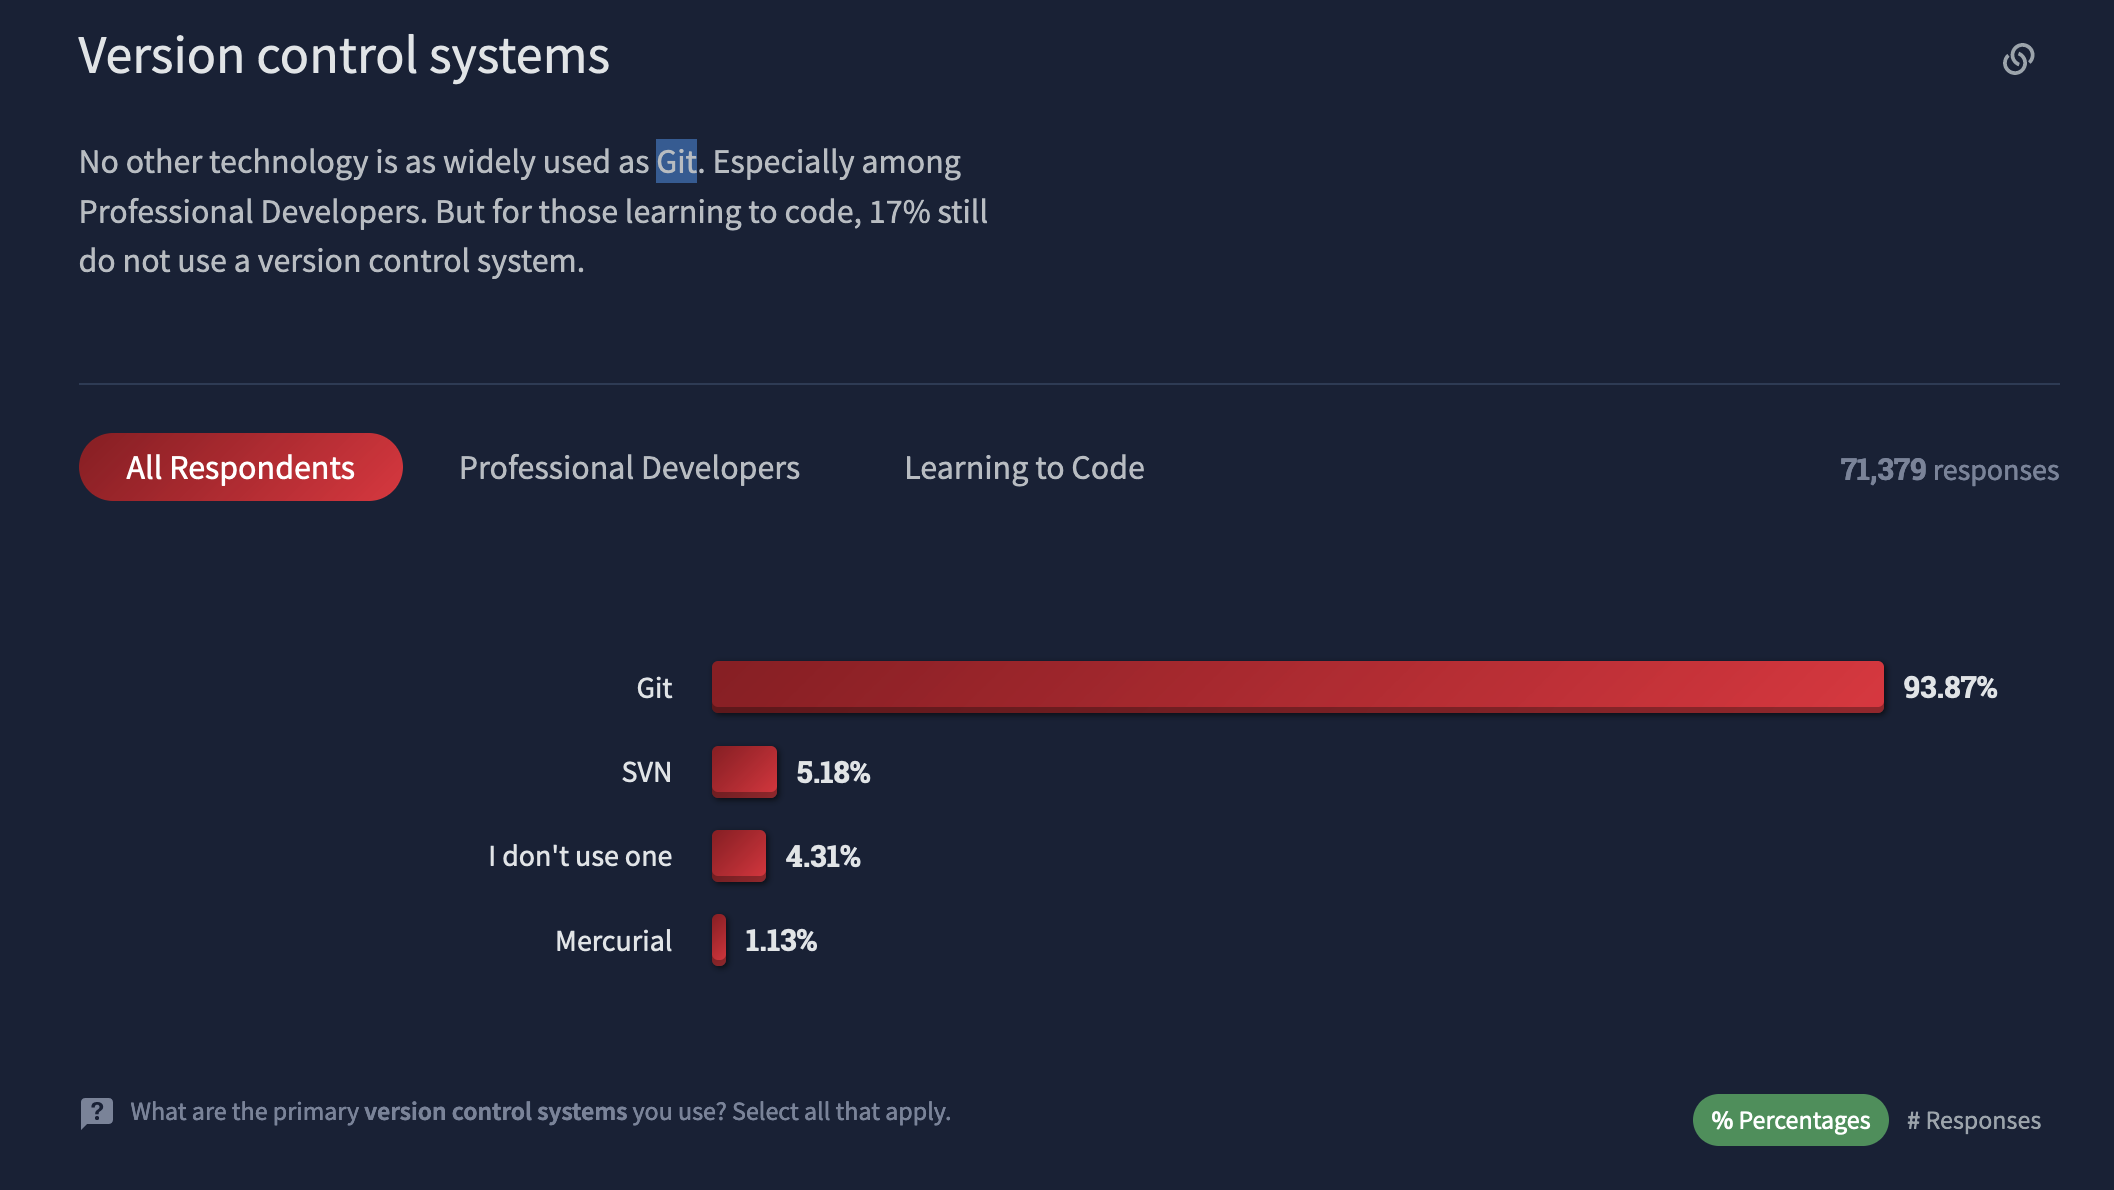 stackoverflow developer survey shows that 93.9% of developers who use version control use git